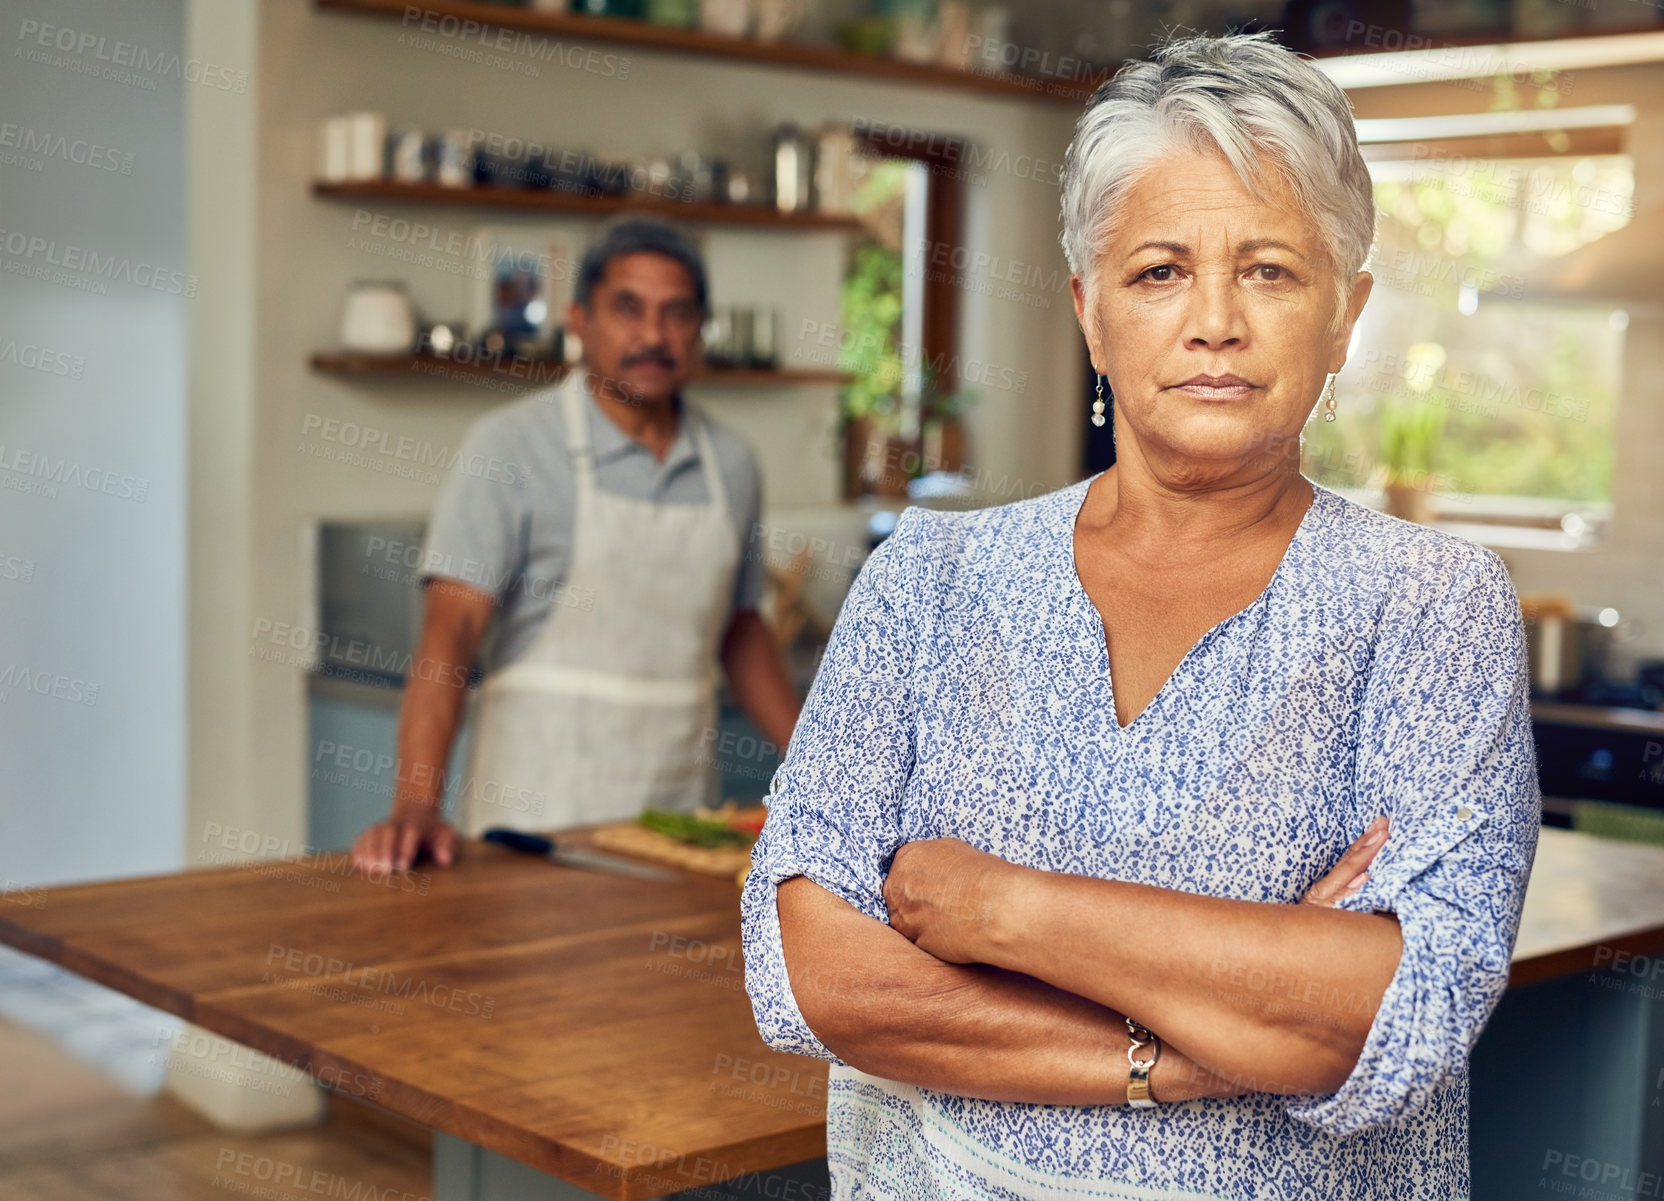 Buy stock photo Portrait of a mature woman looking upset after a fight with her husband who is cooking in the background